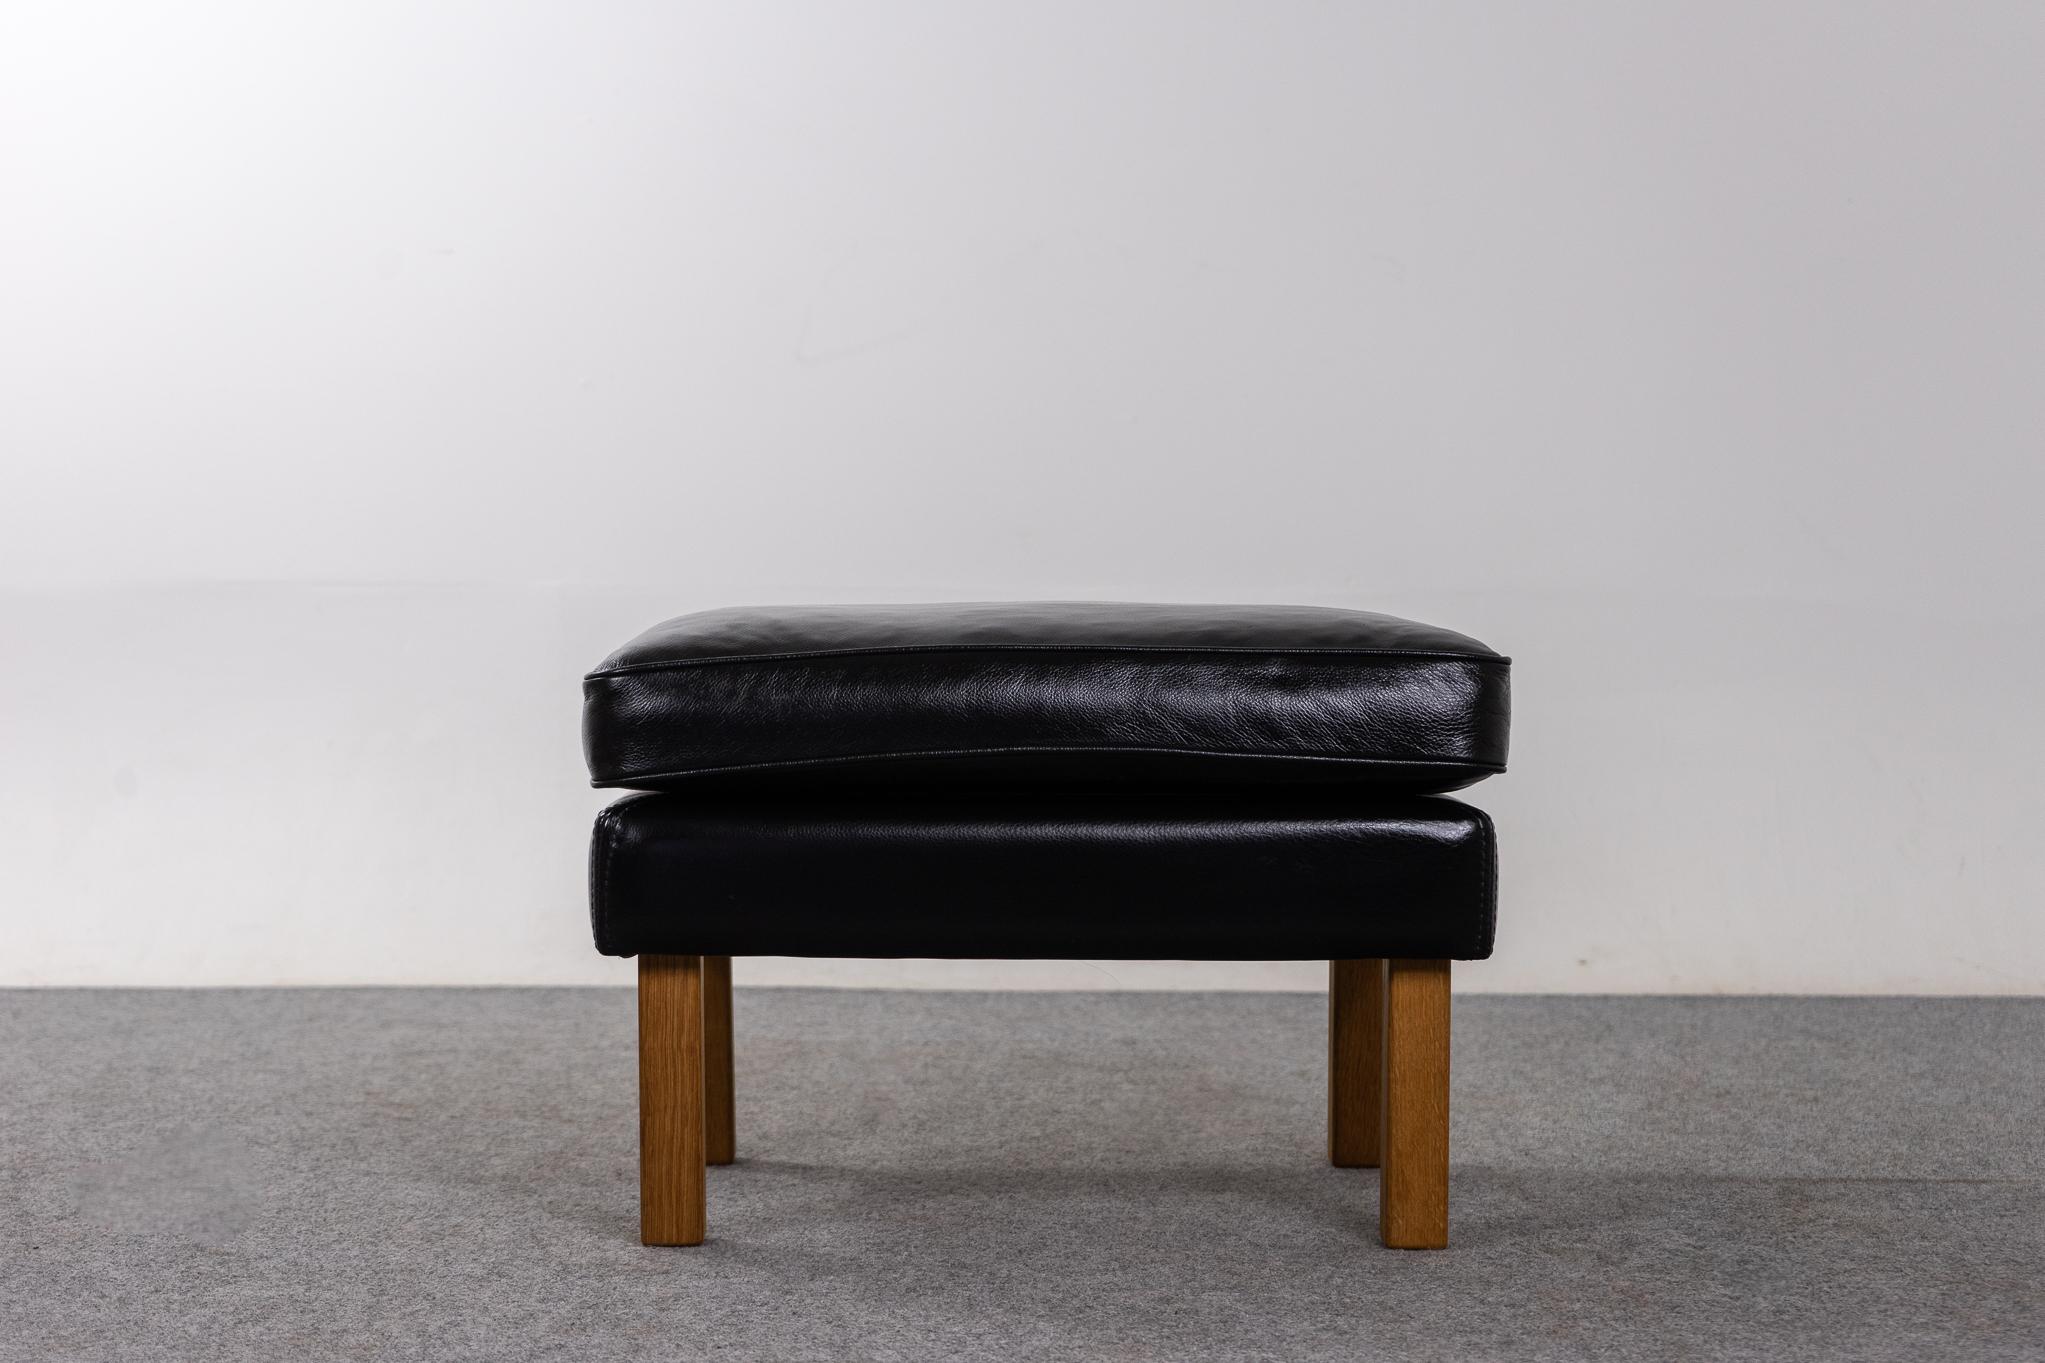 Leather Danish footstool, circa 1960's. Robust, compact design with contrasting oak legs. Leather has been cleaned and conditioned. Sturdy and structurally sound. Would make a great entryway seat!

Please inquire for international and remote